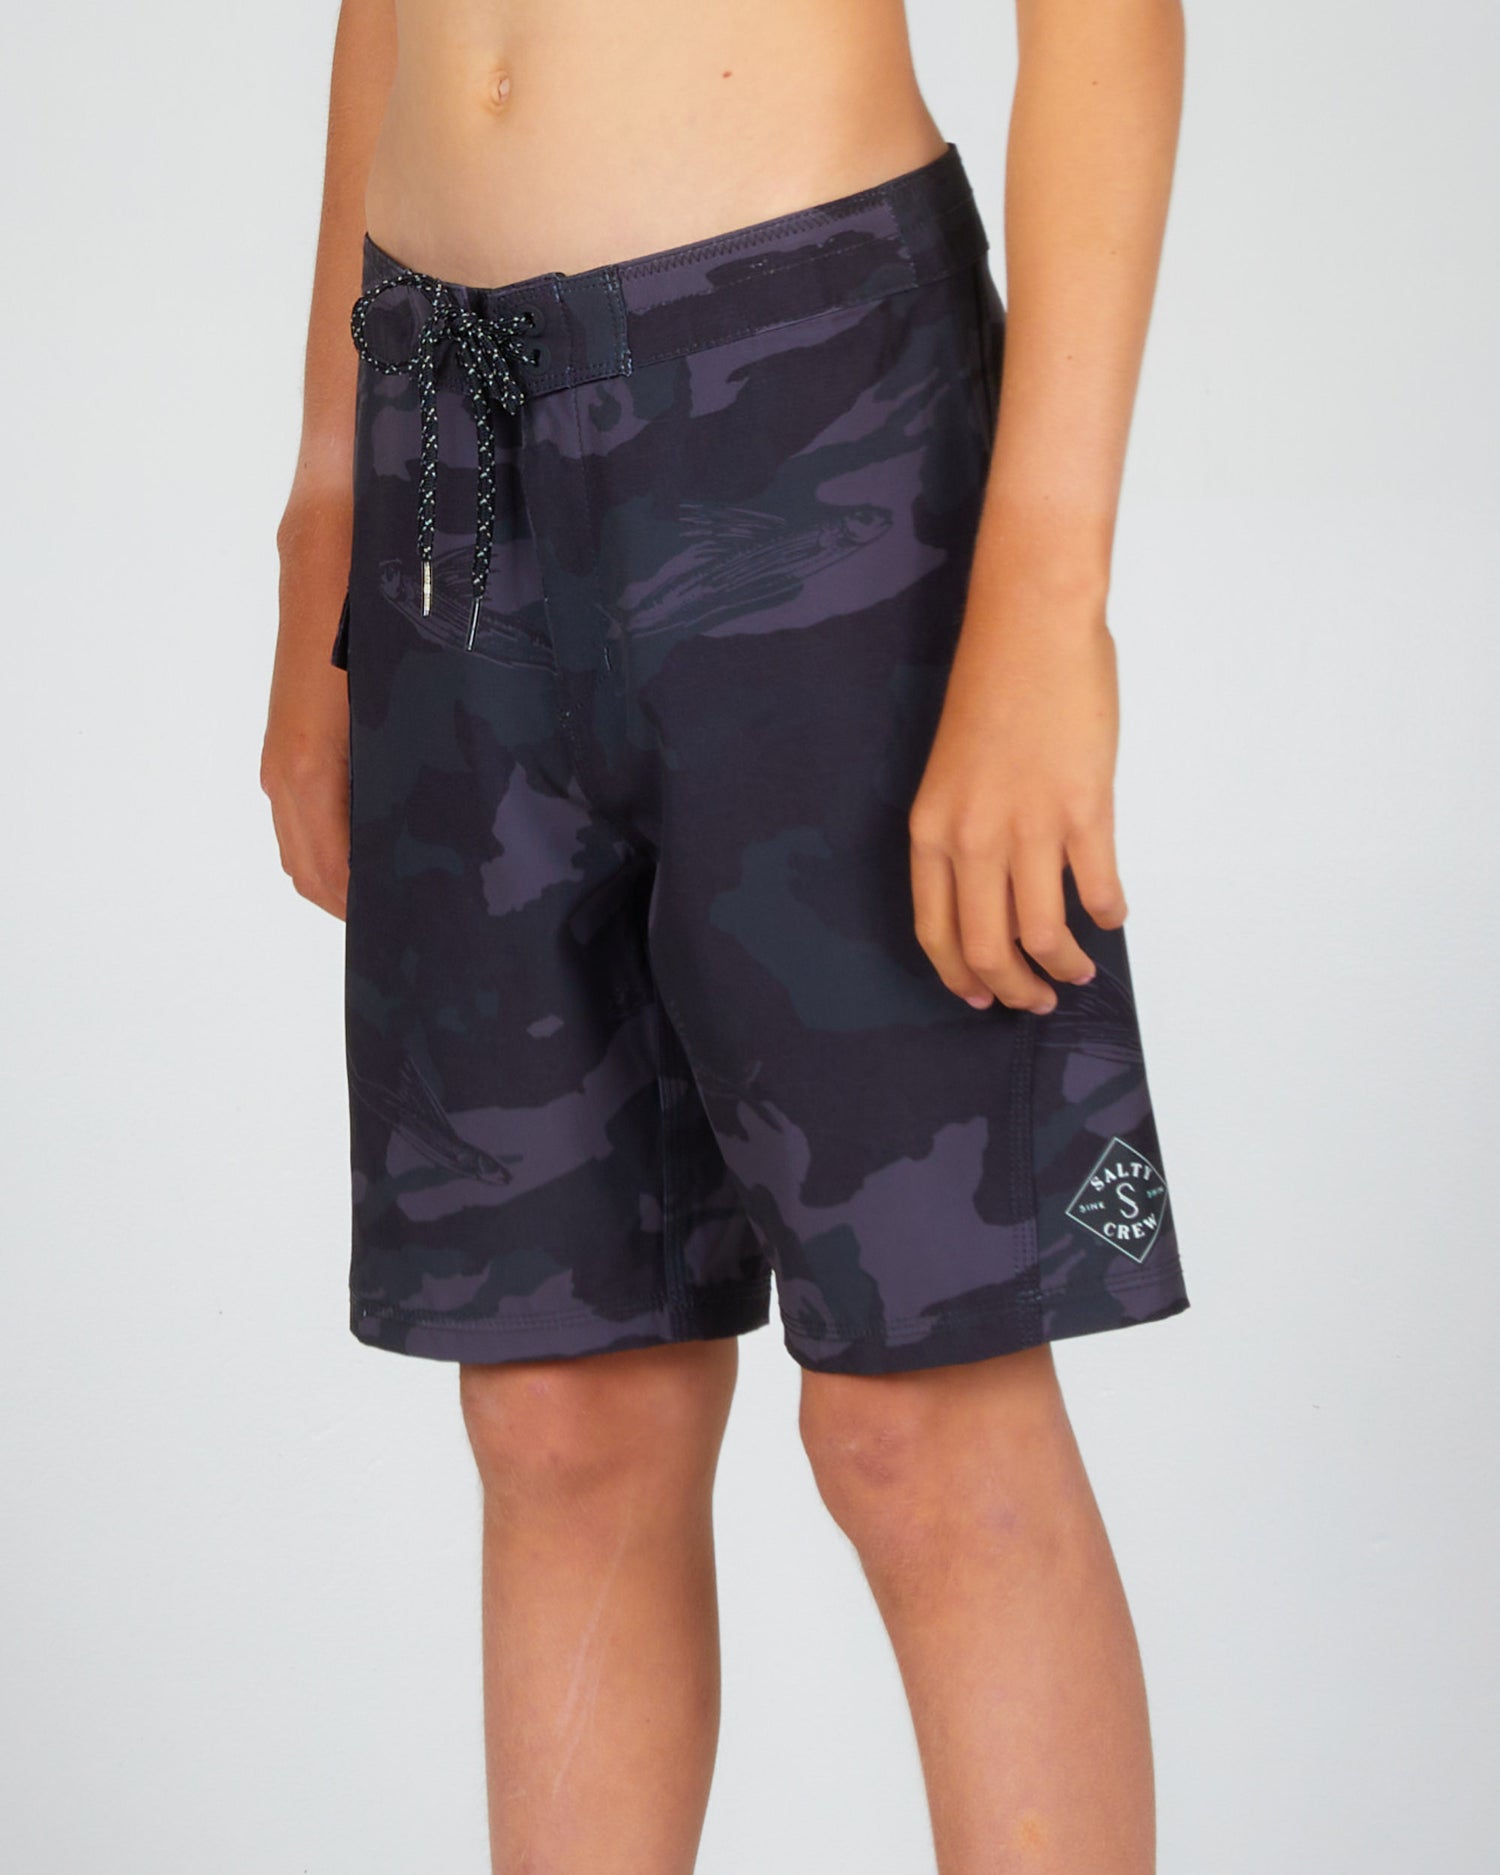 on body front angled view of the Lowtide Boys Black Camo Boardshort